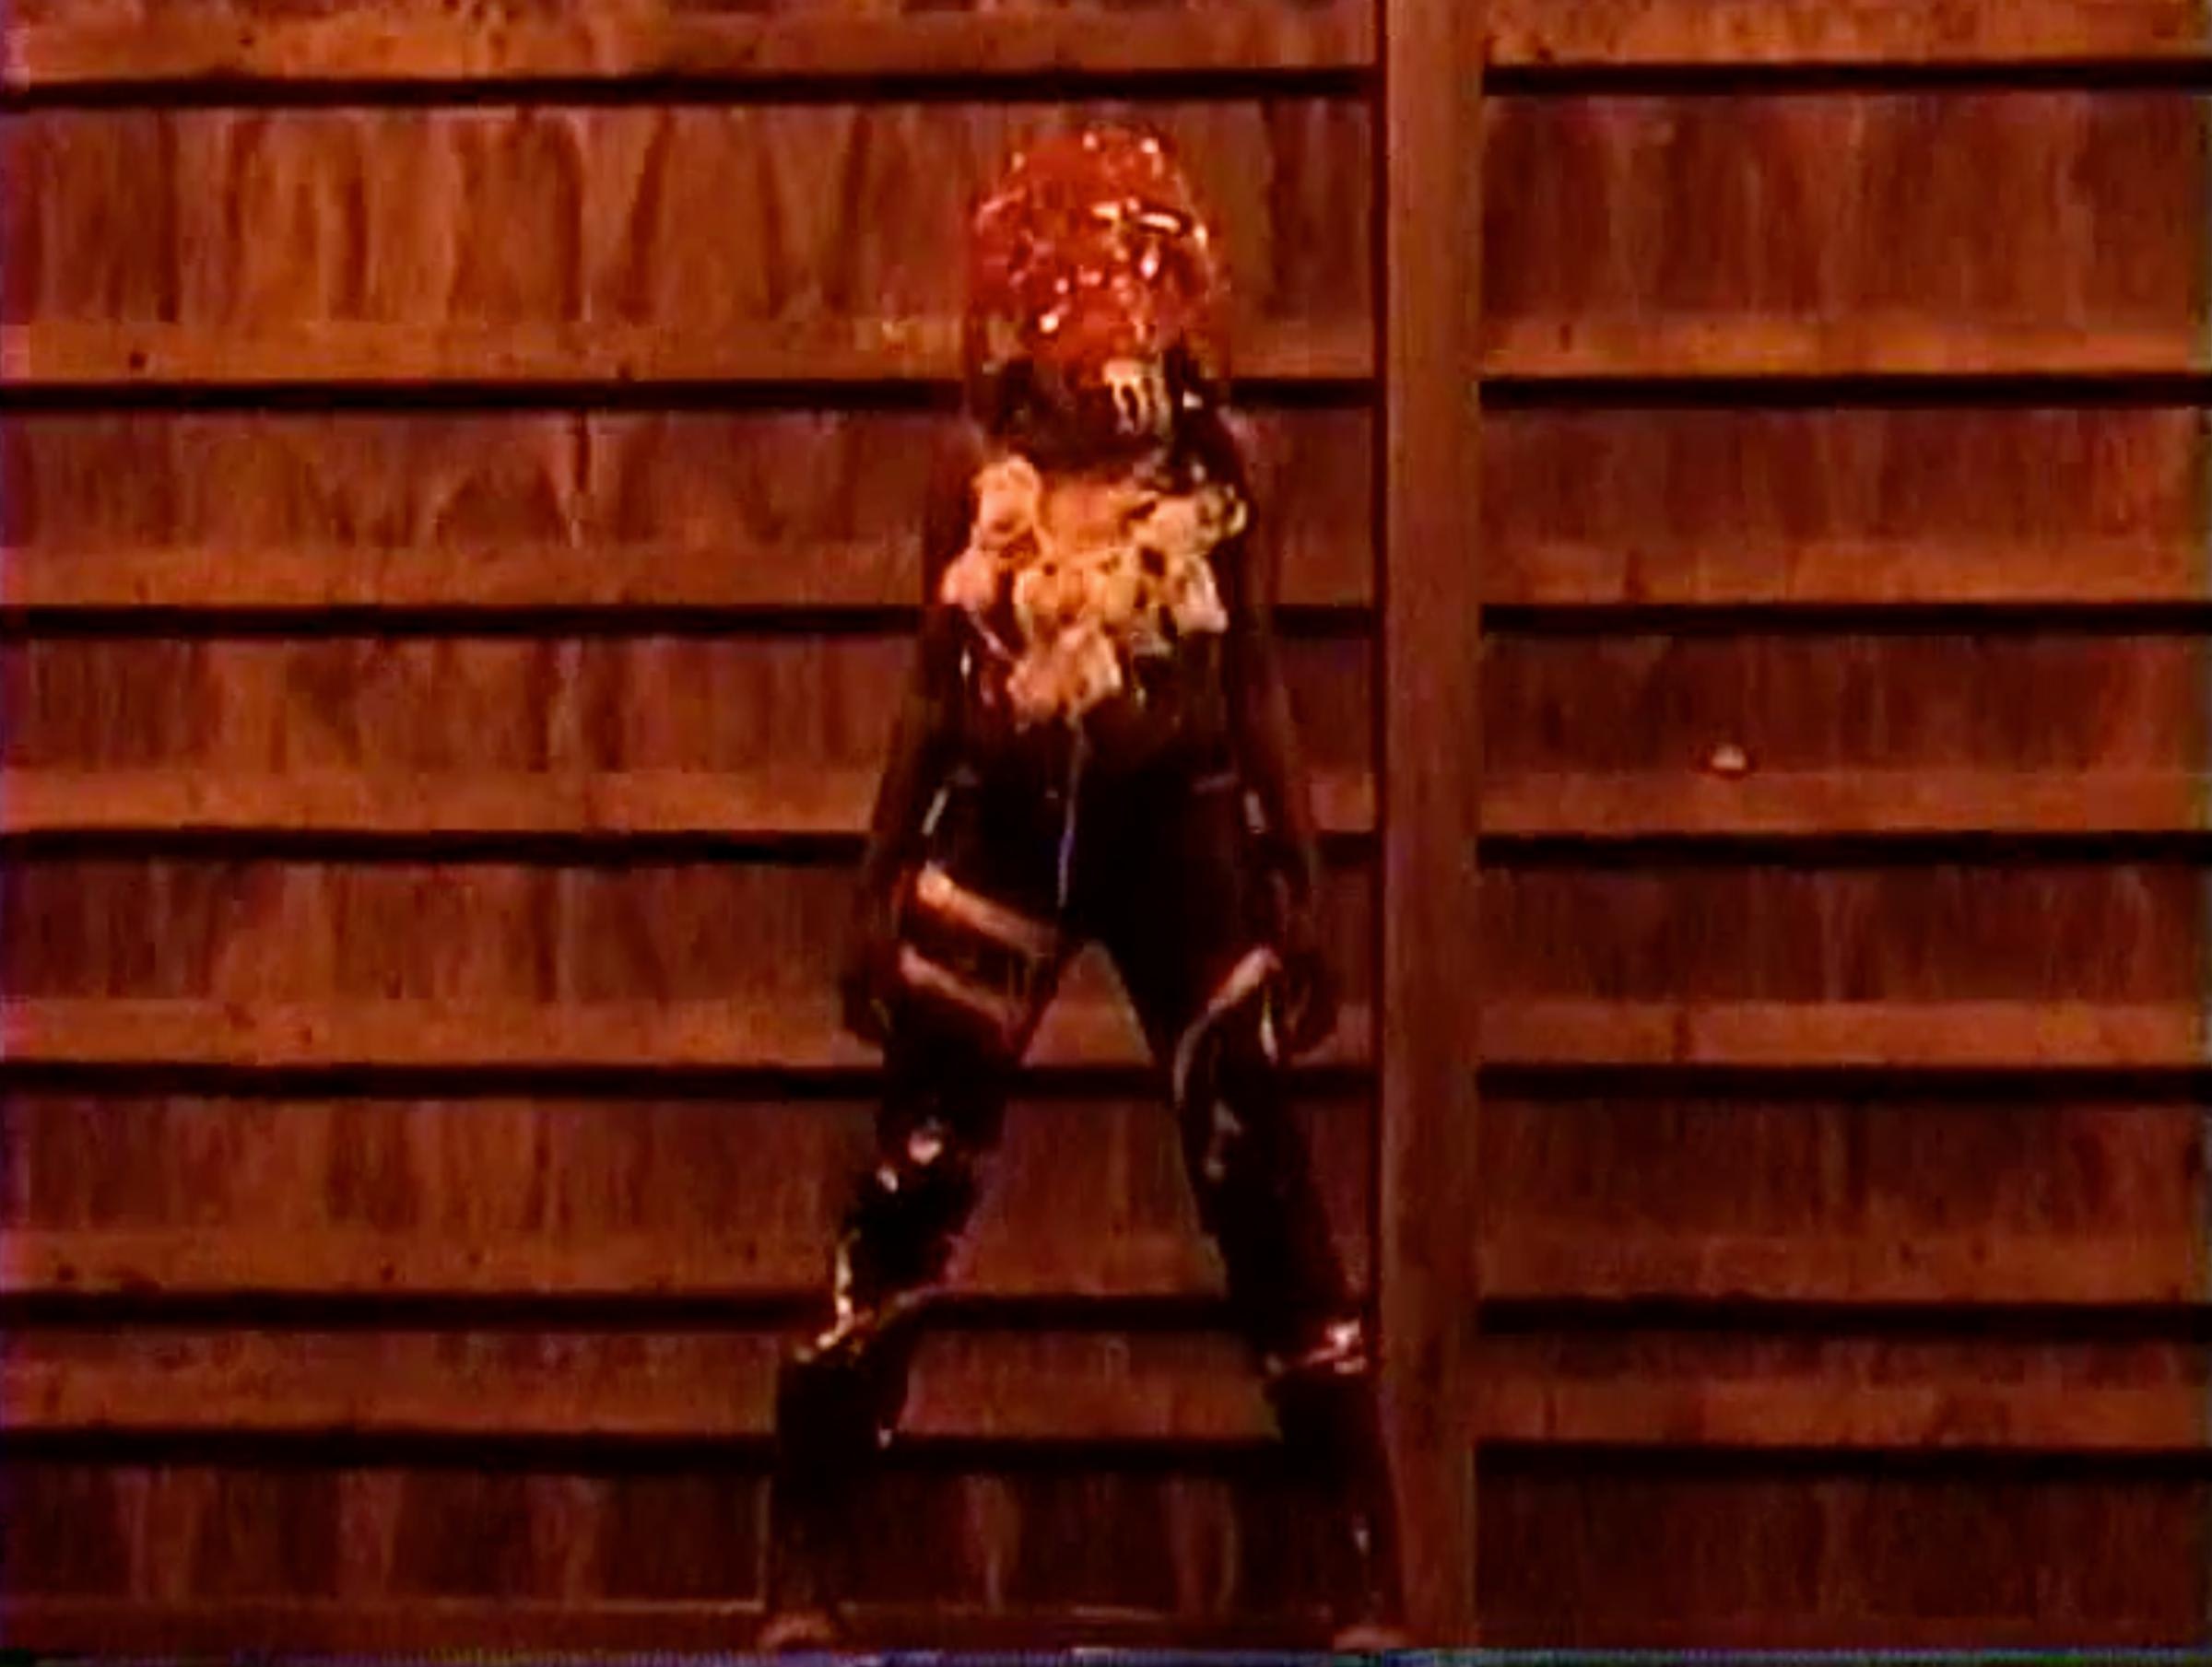 A woman in strange head covering and clothing stands in front of a wooden wall.